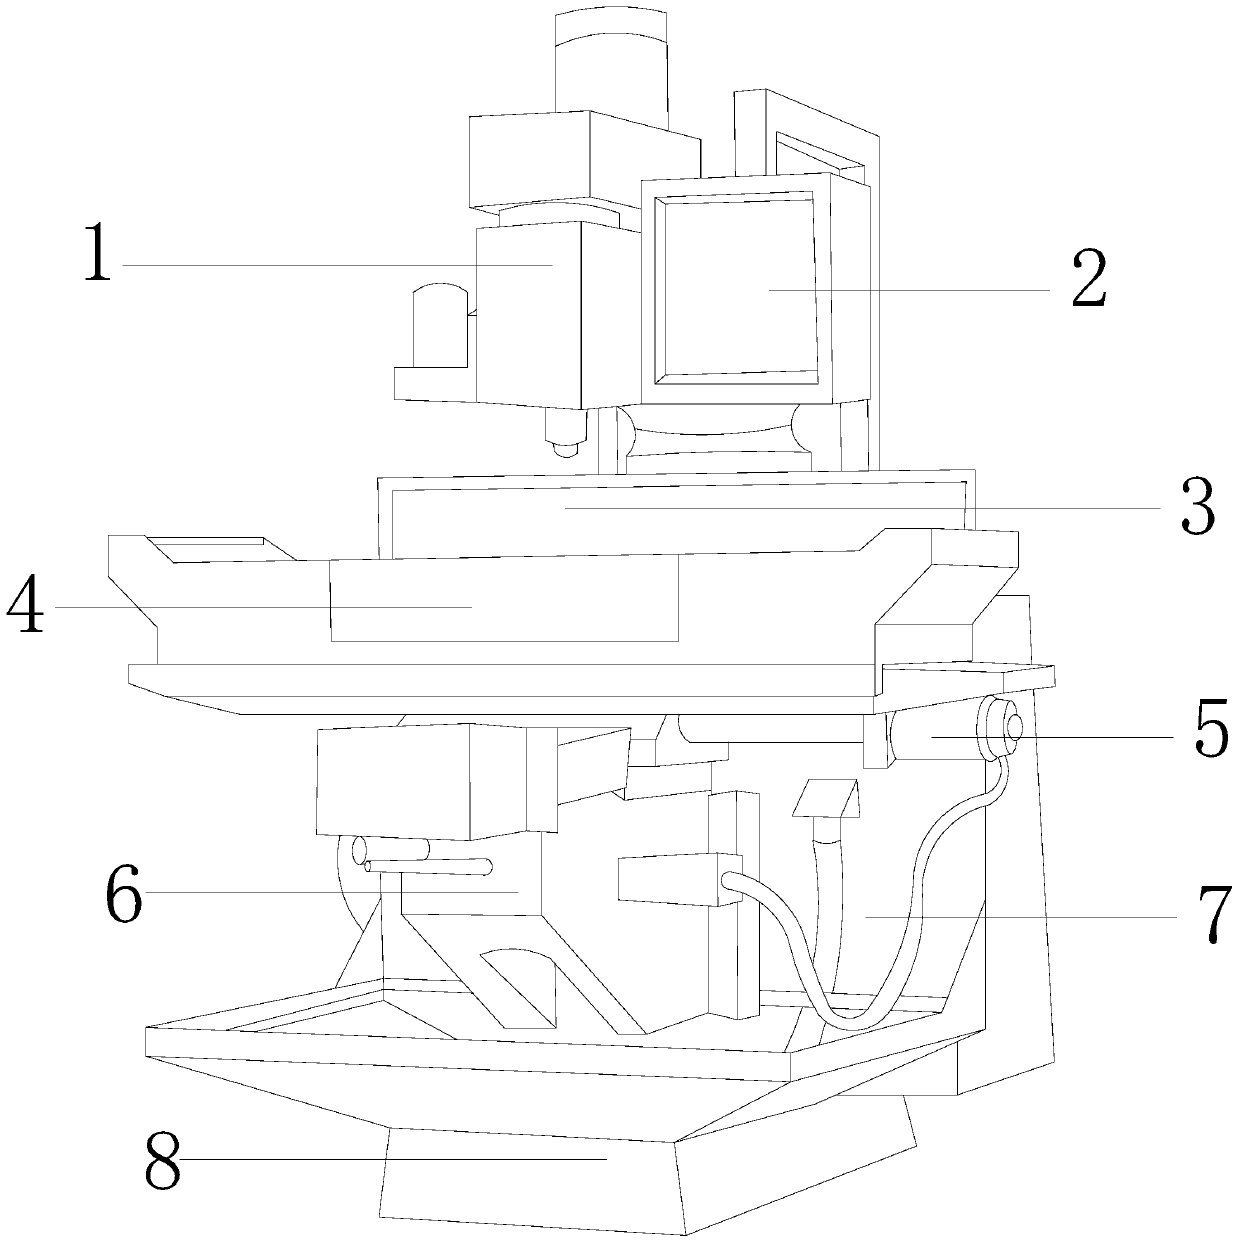 Numerical control four-axis vertical milling machine based on wheel pushing angle distance of relying key for adjusting milling head groove